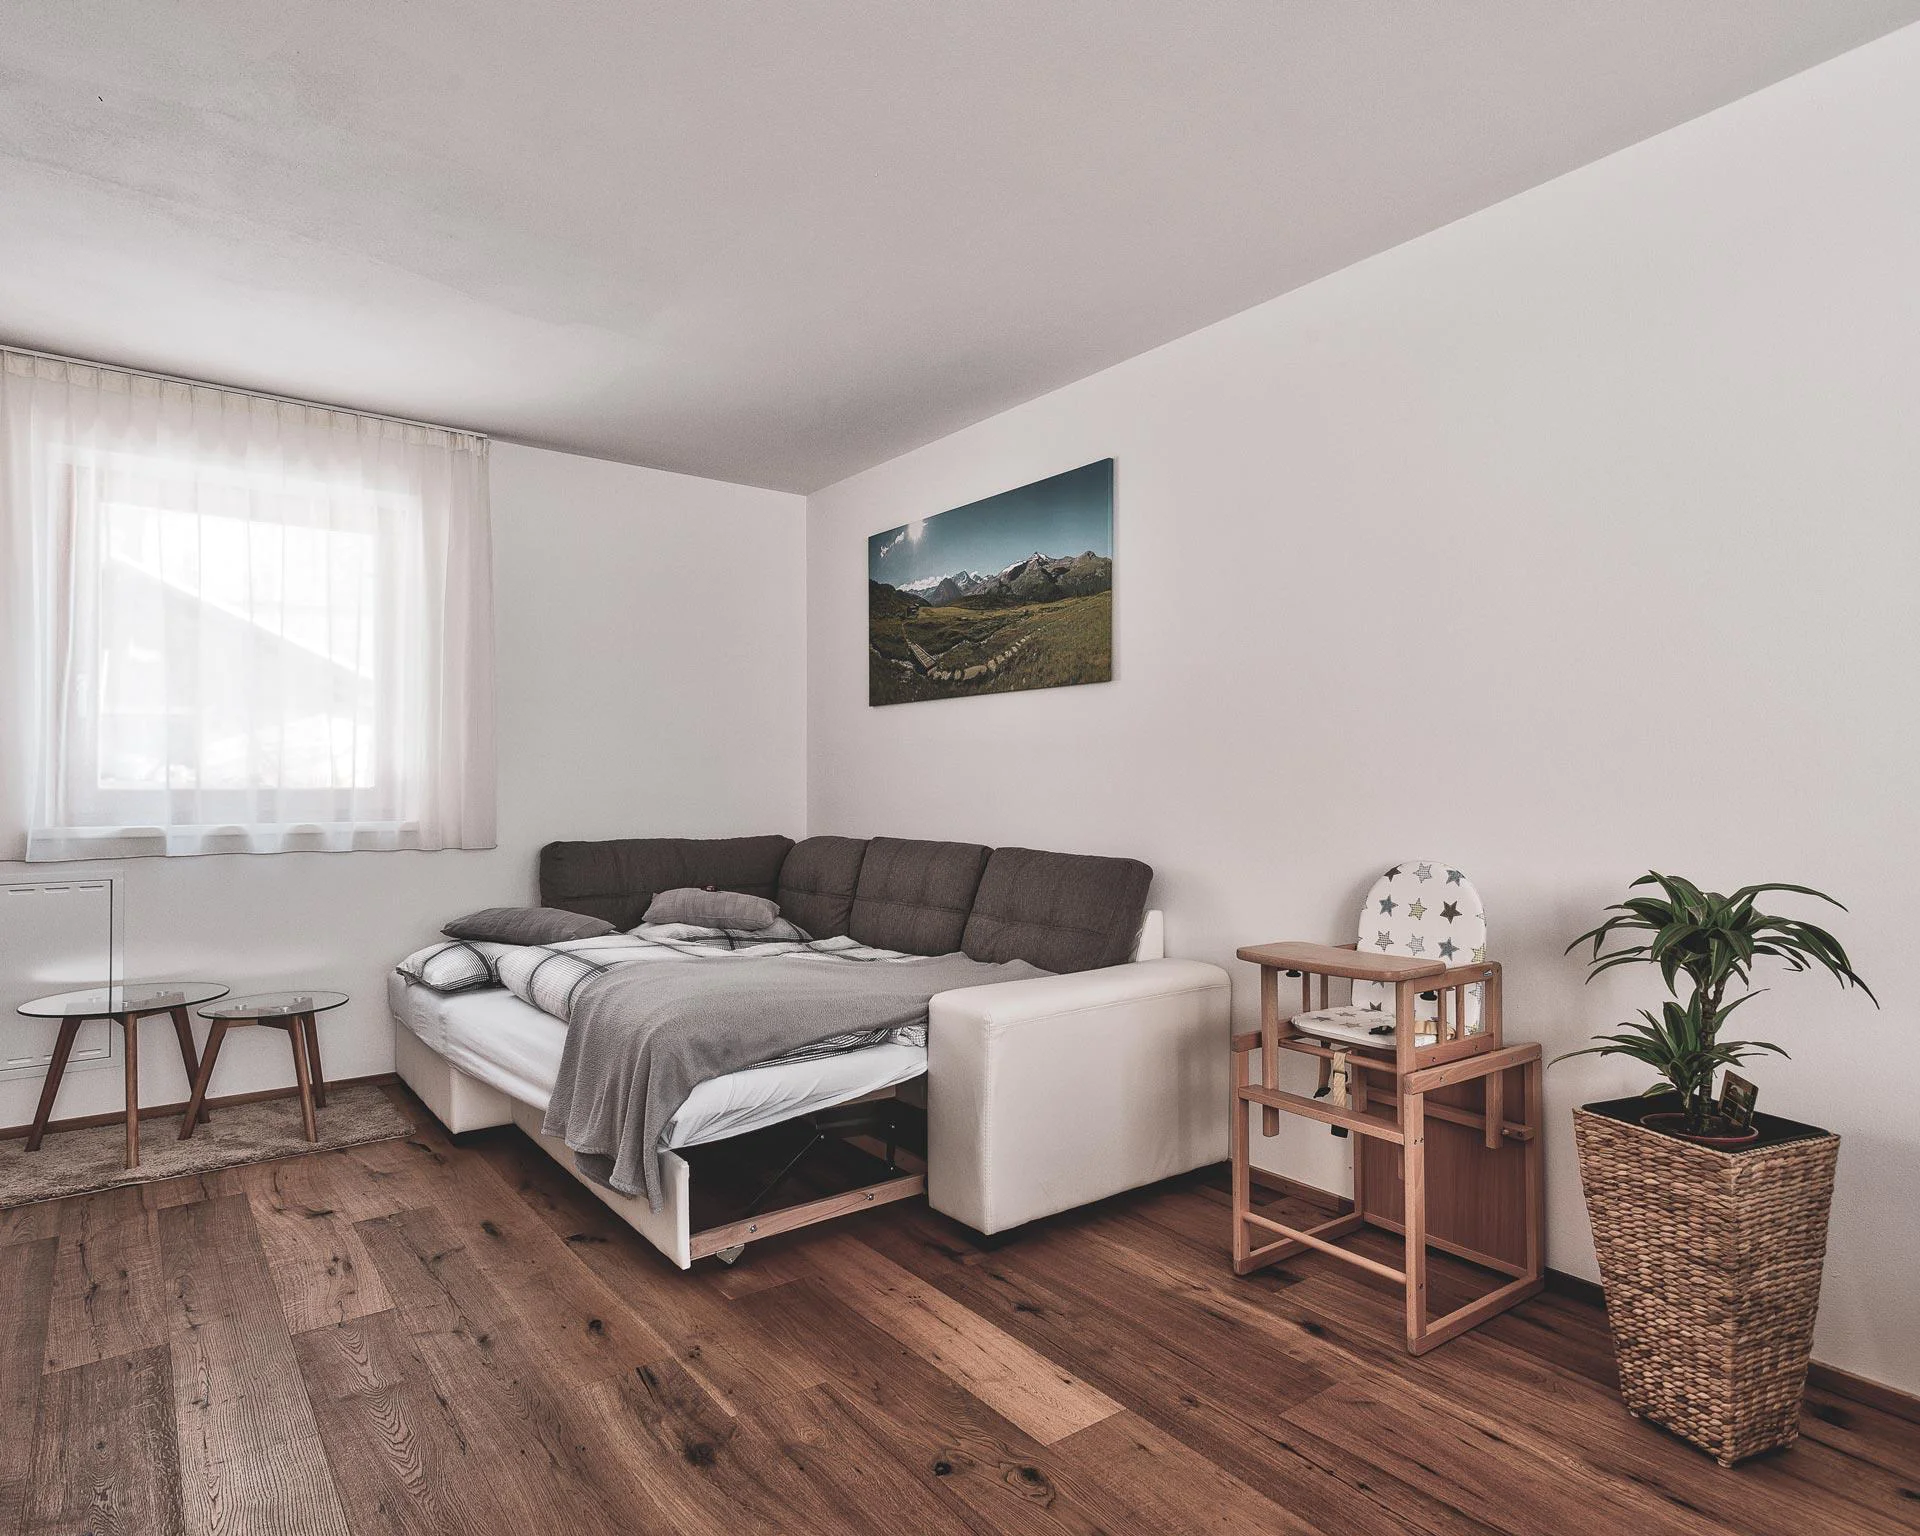 Apartments Pfarrwirt Sand in Taufers/Campo Tures 9 suedtirol.info